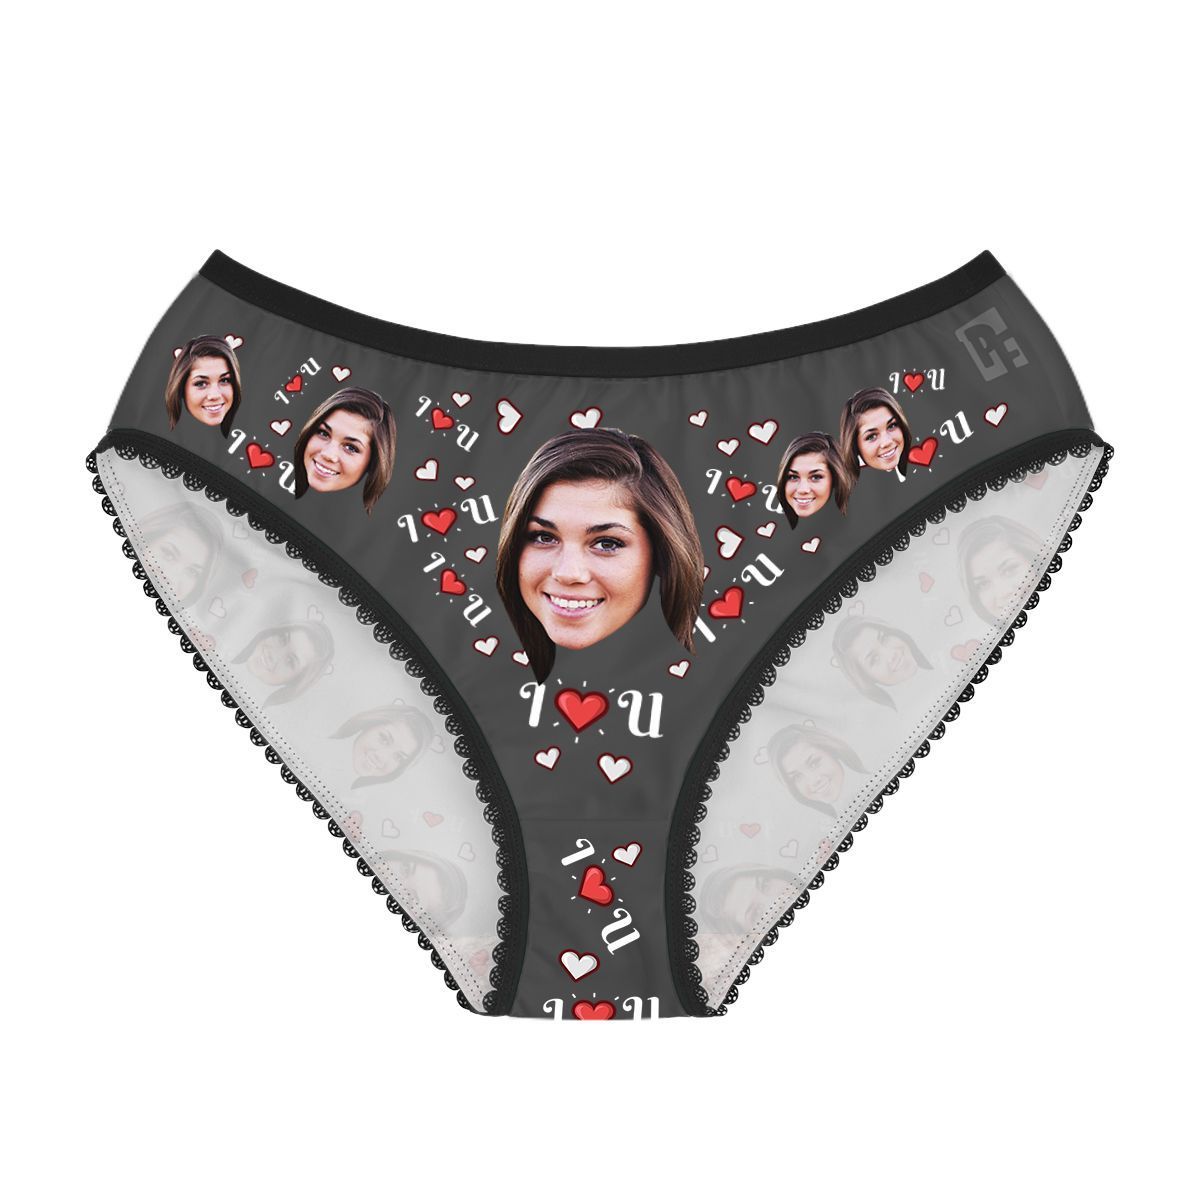 Dark I <3 You women's underwear briefs personalized with photo printed on them